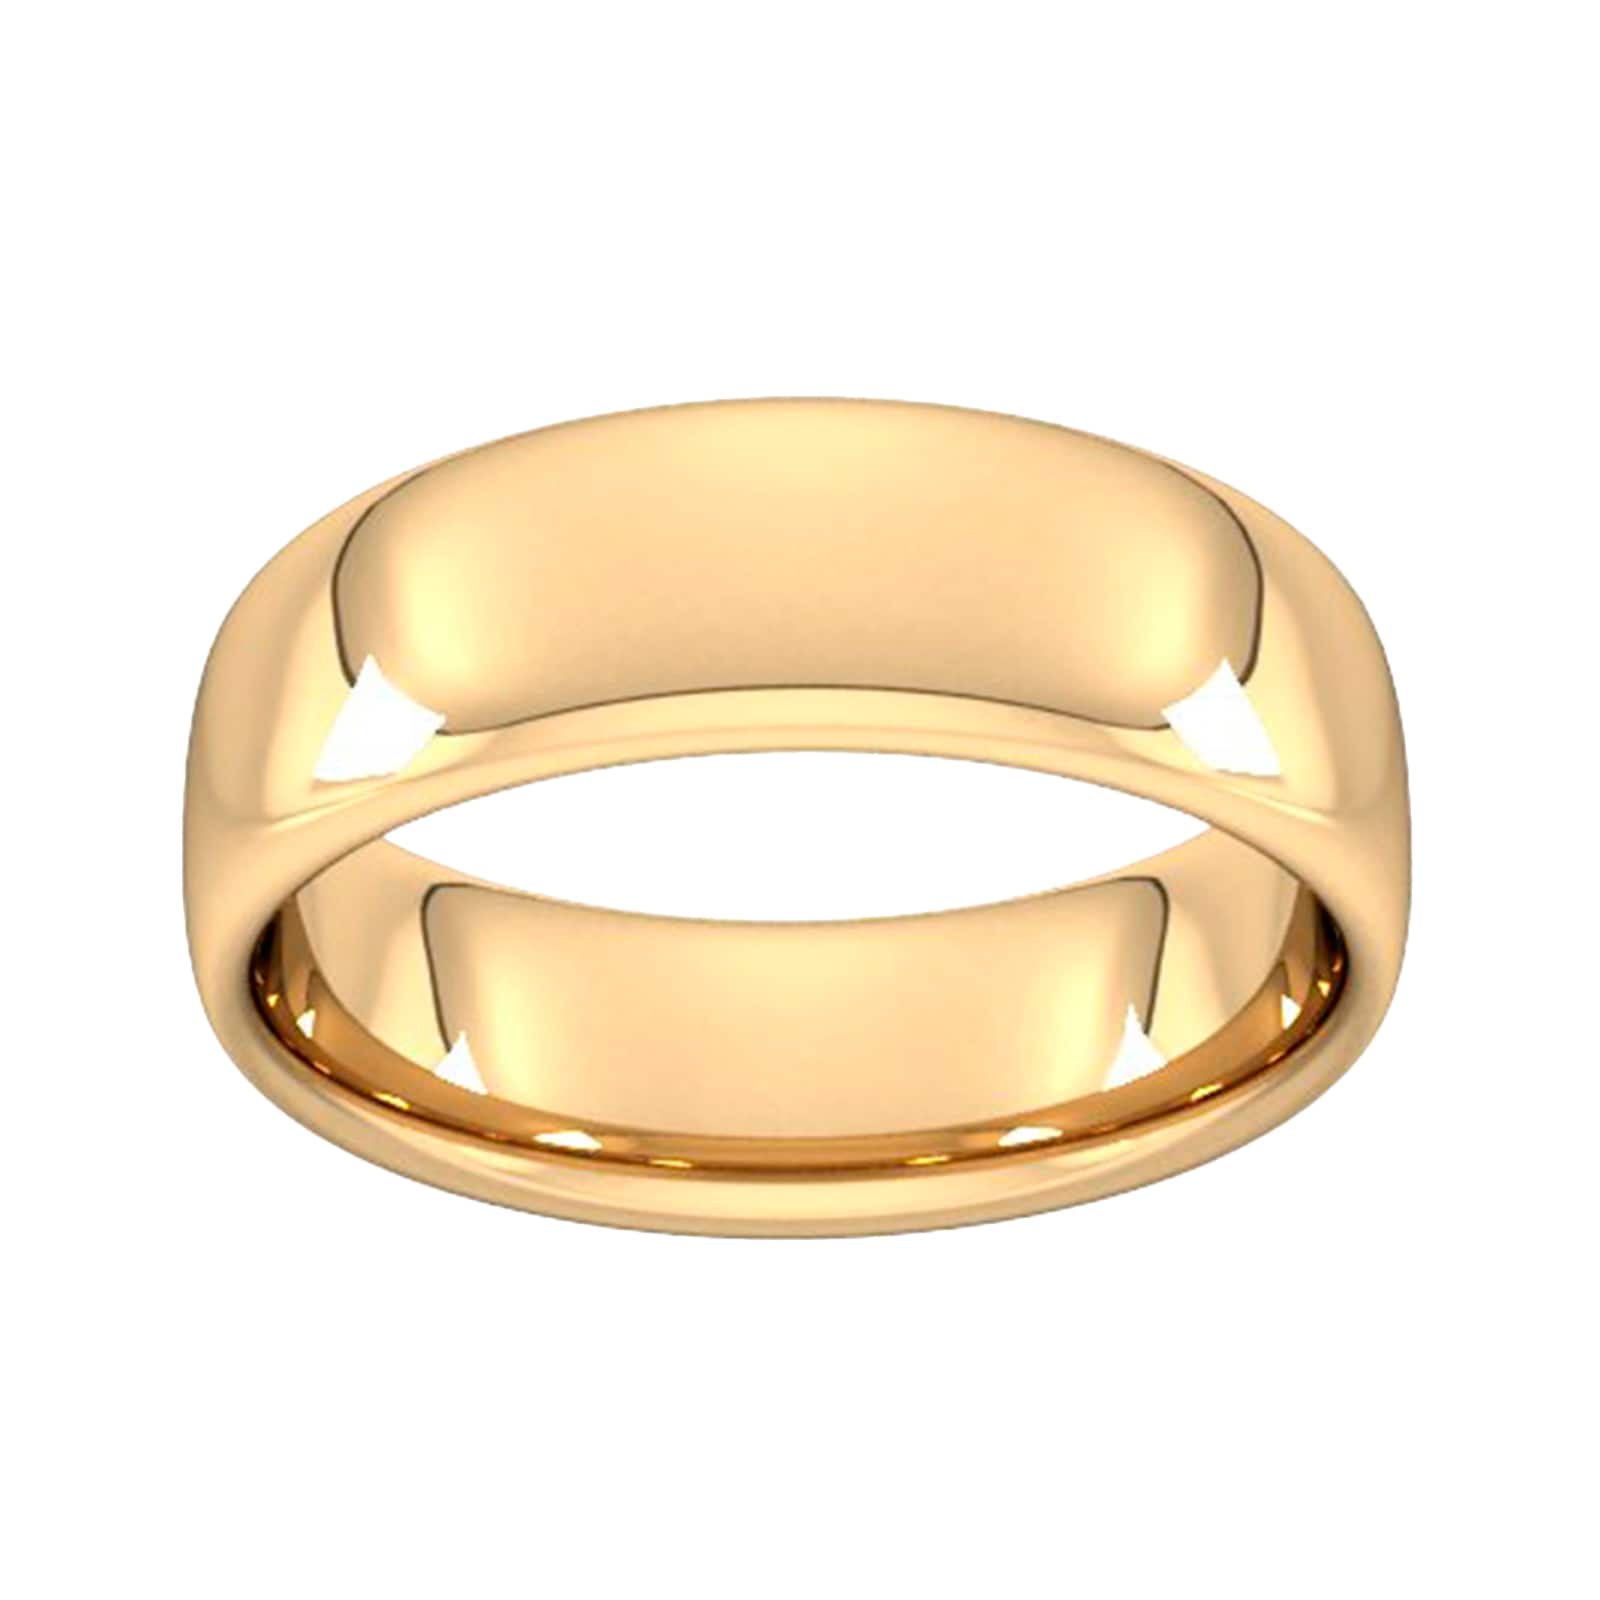 7mm Slight Court Heavy Wedding Ring In 9 Carat Yellow Gold - Ring Size X